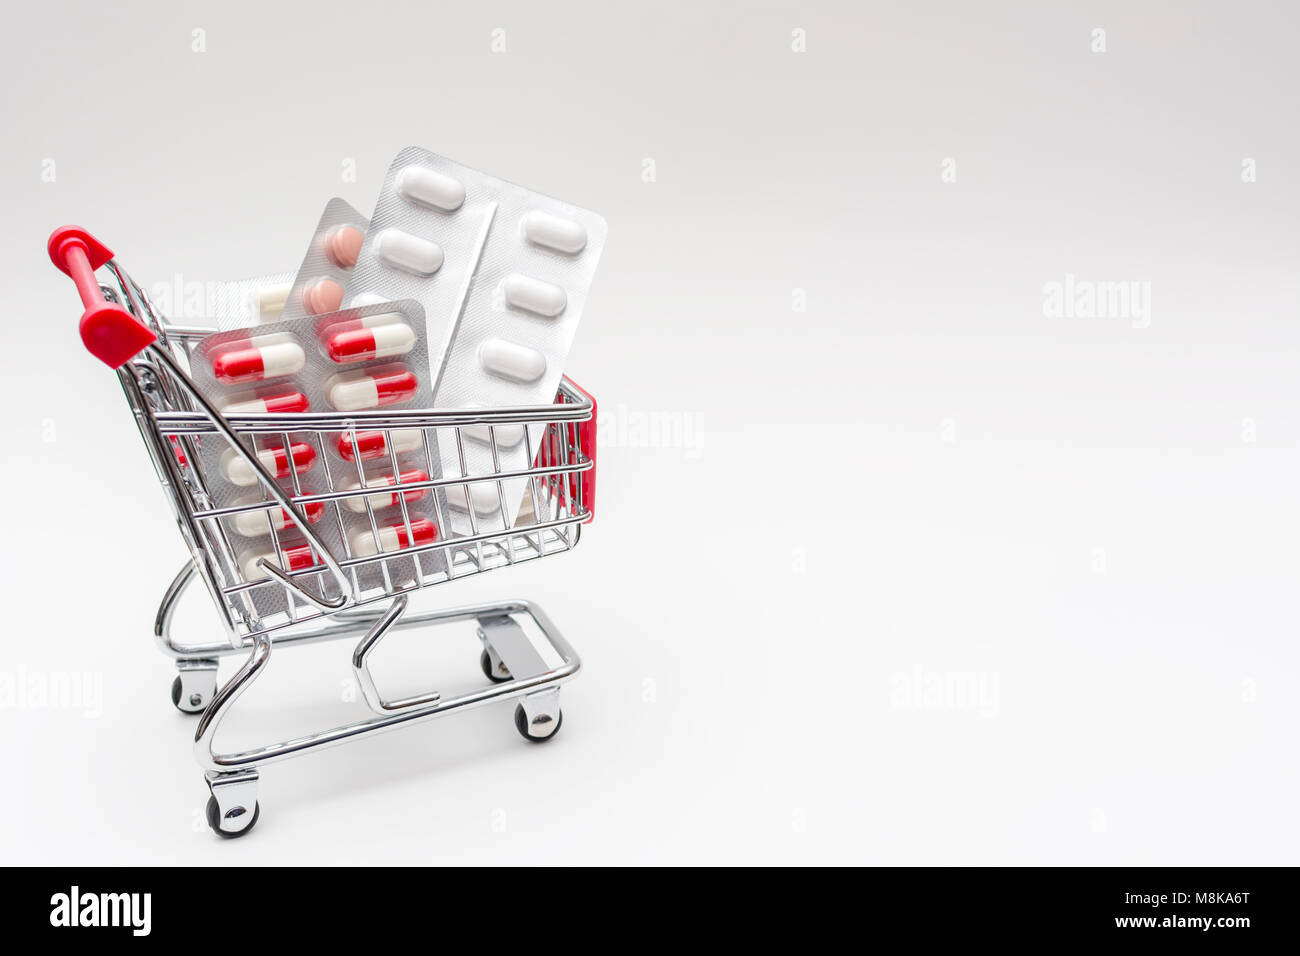 Buying a drugs from pharmacy, drugs in shopping cart, shoping cart isolated on white background Stock Photo